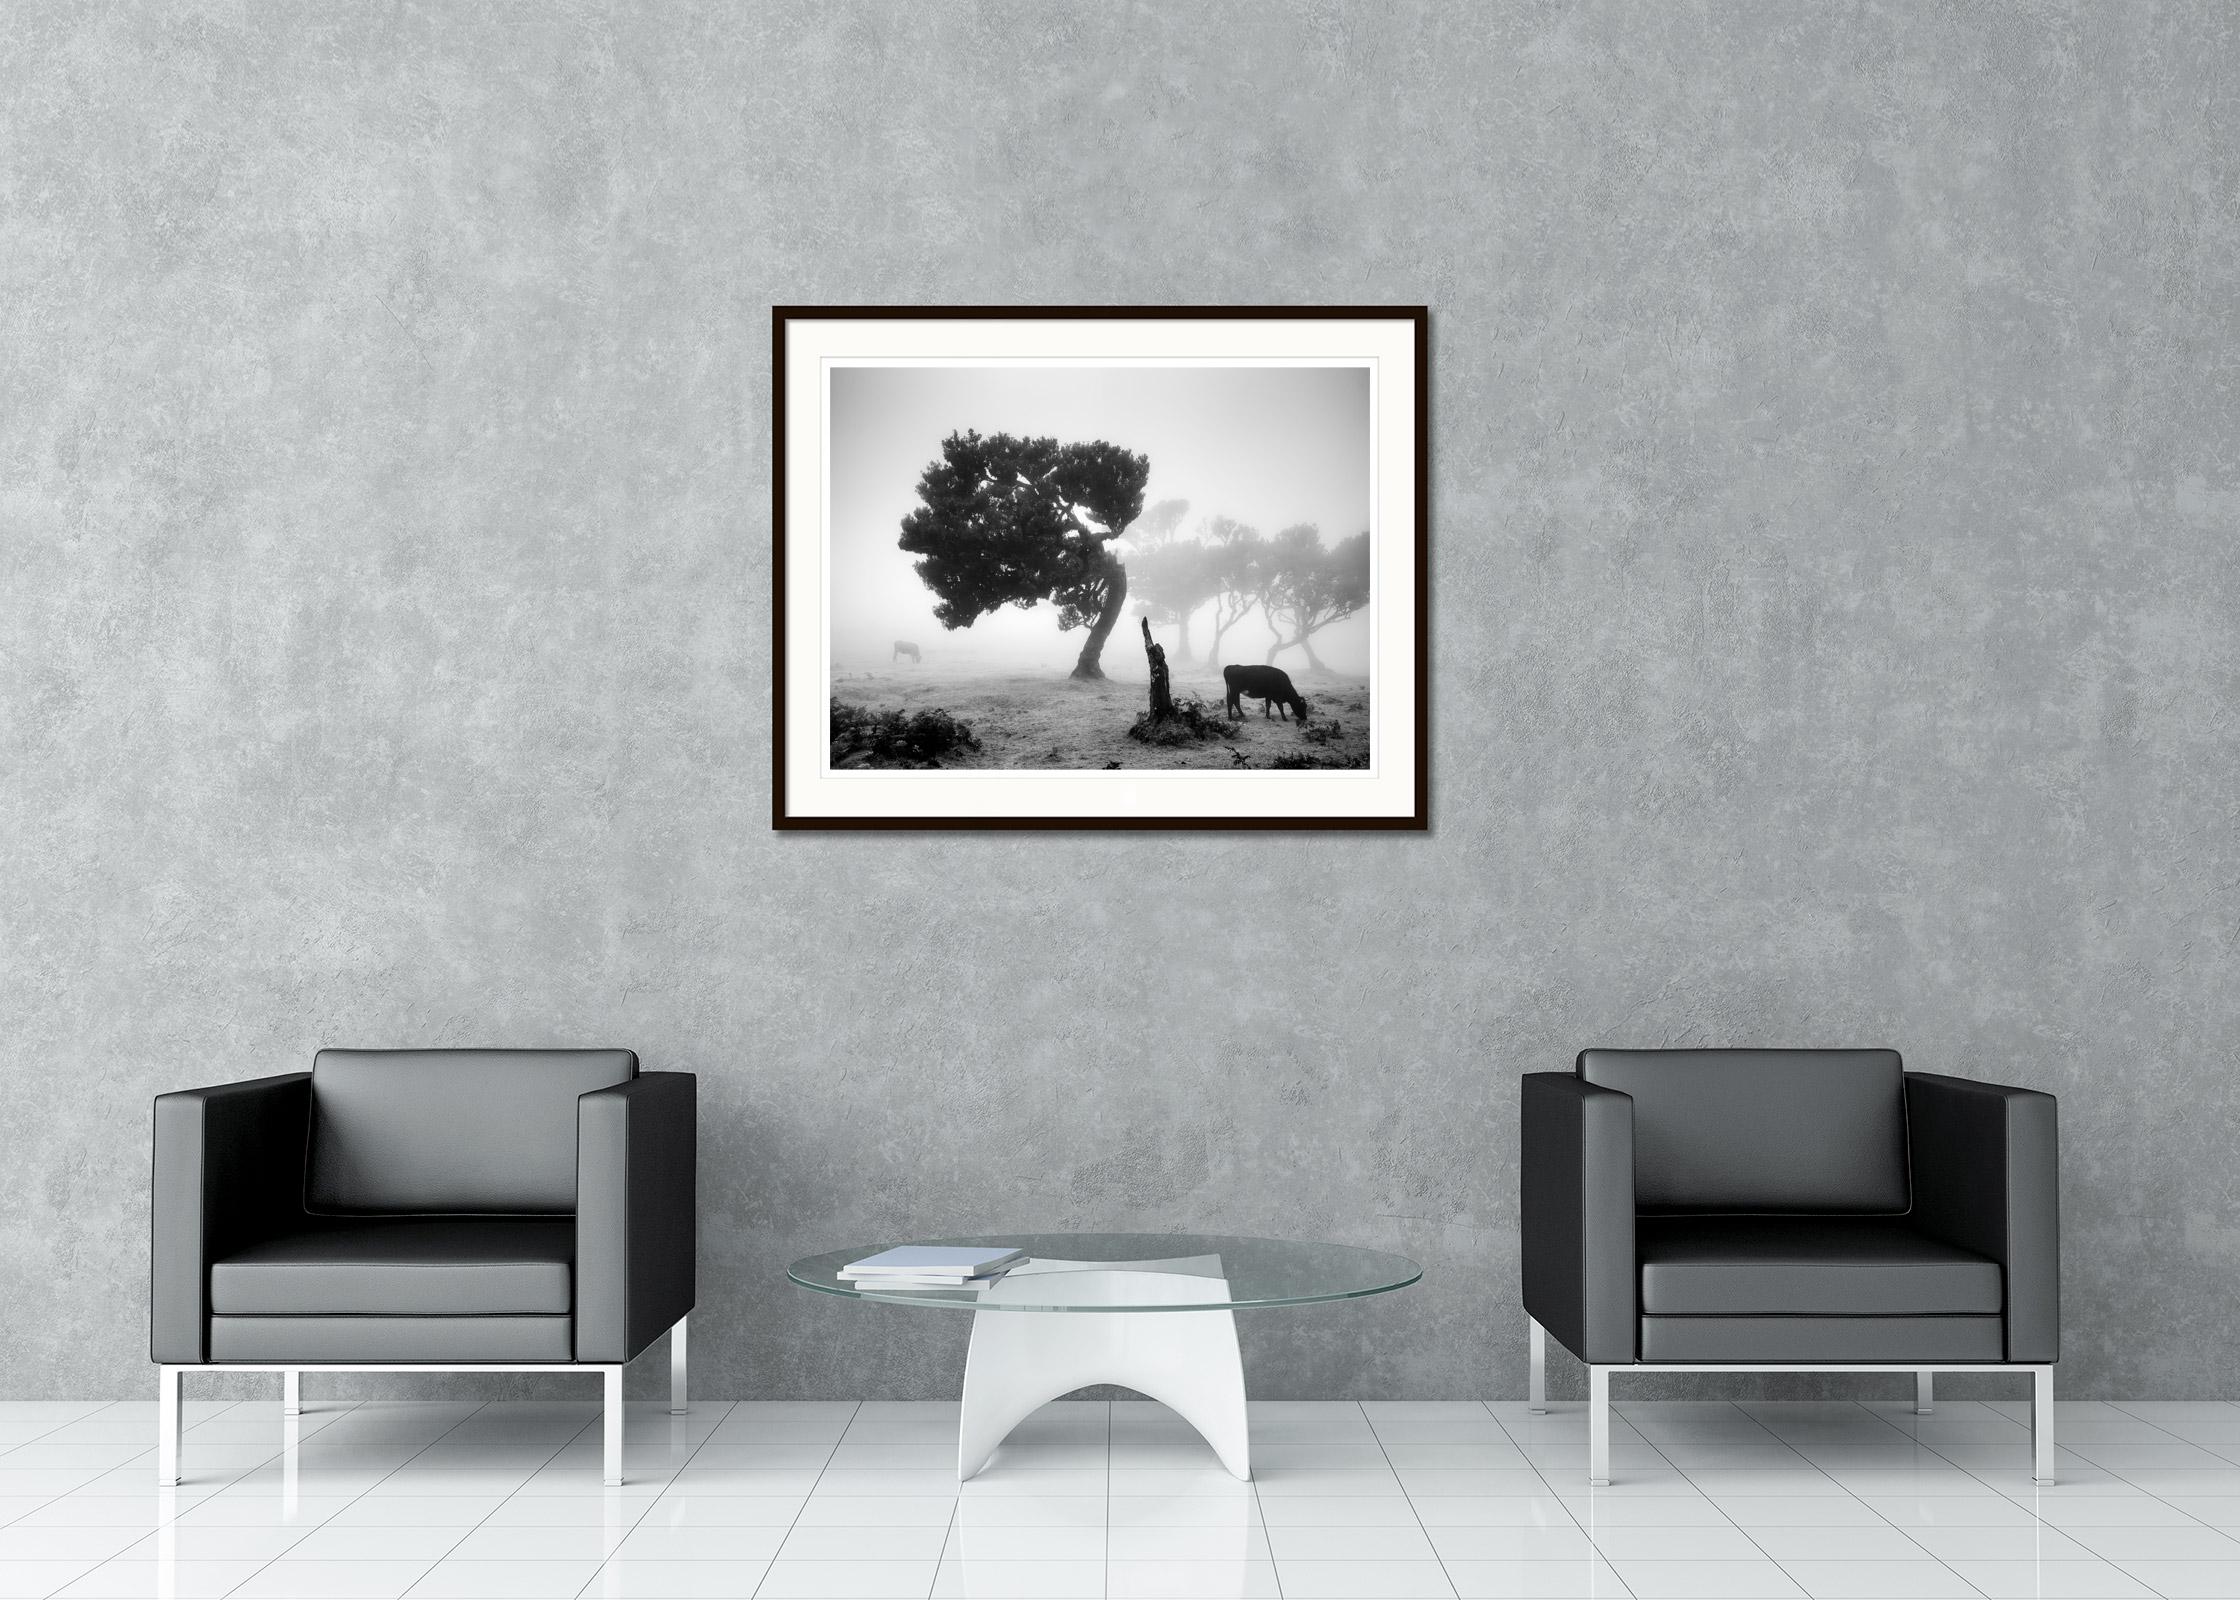 Black and white fine art landscape photography. Fairy forest of madeira in the fog with cows and crooked trees, Fanal, Portugal. Archival pigment ink print, edition of 8. Signed, titled, dated and numbered by artist. Certificate of authenticity